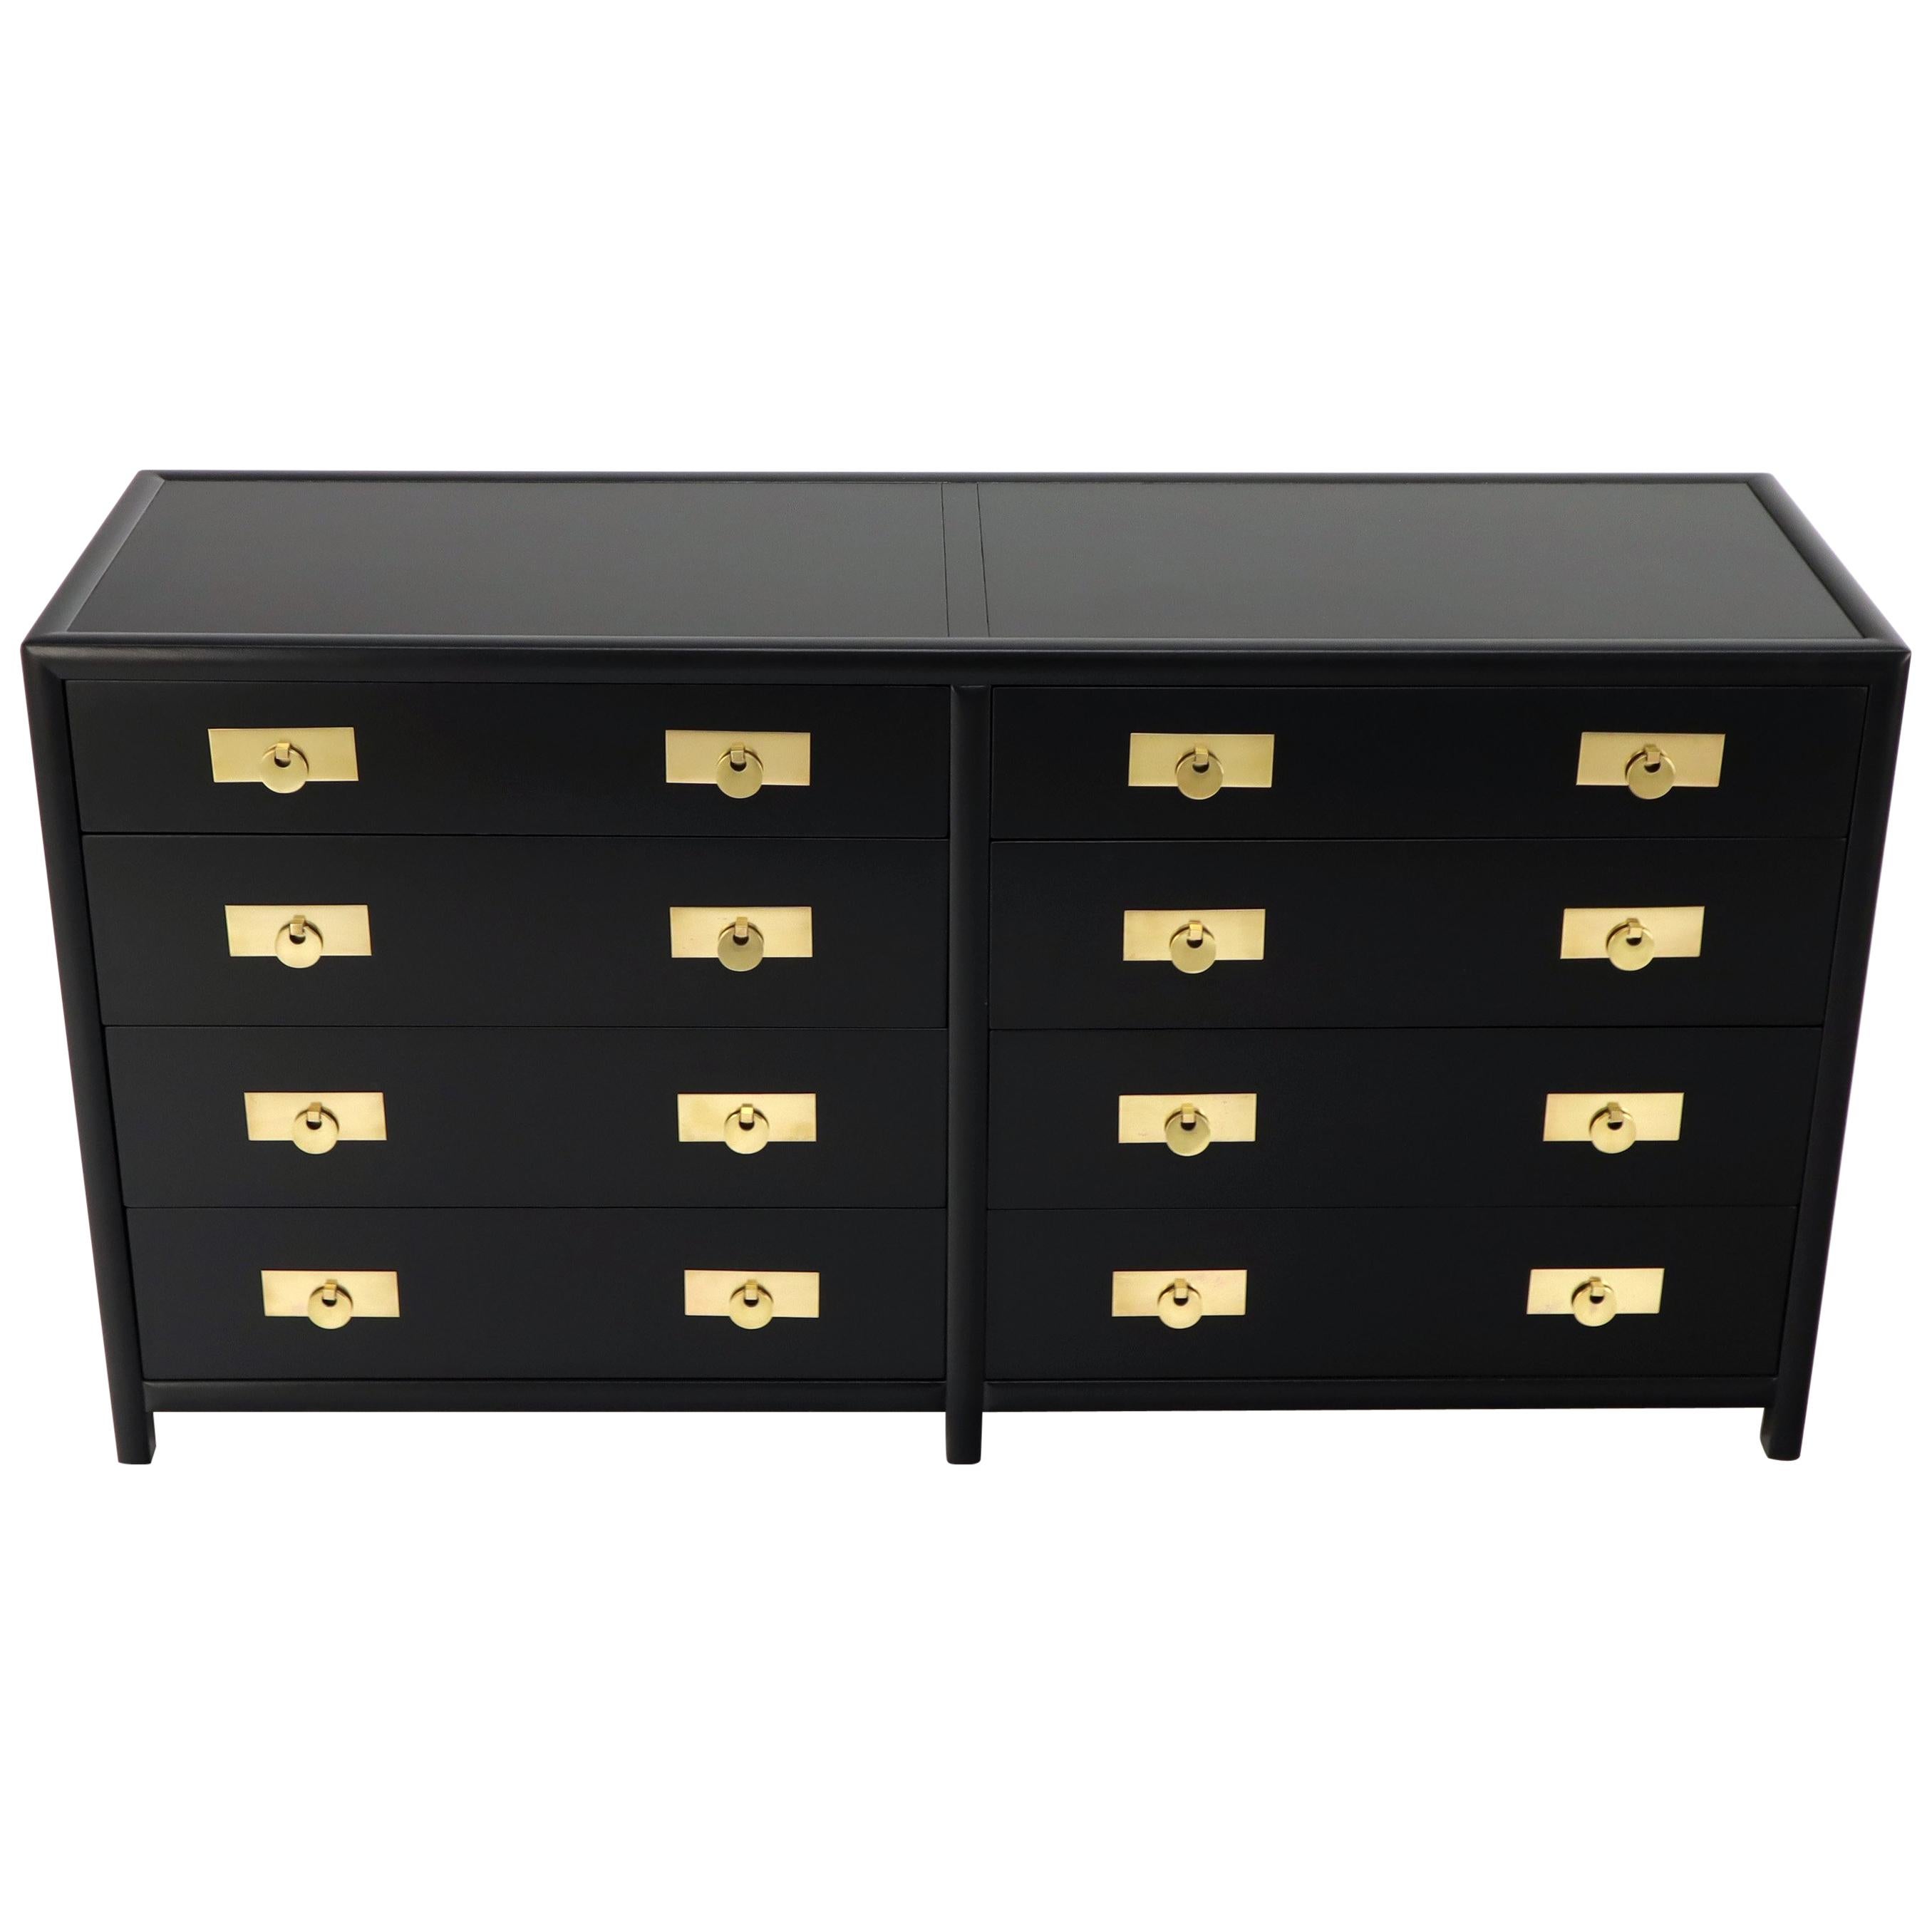 Baker Black Lacquer Brass Hardware Medalion Pulls Compact Double Dresser